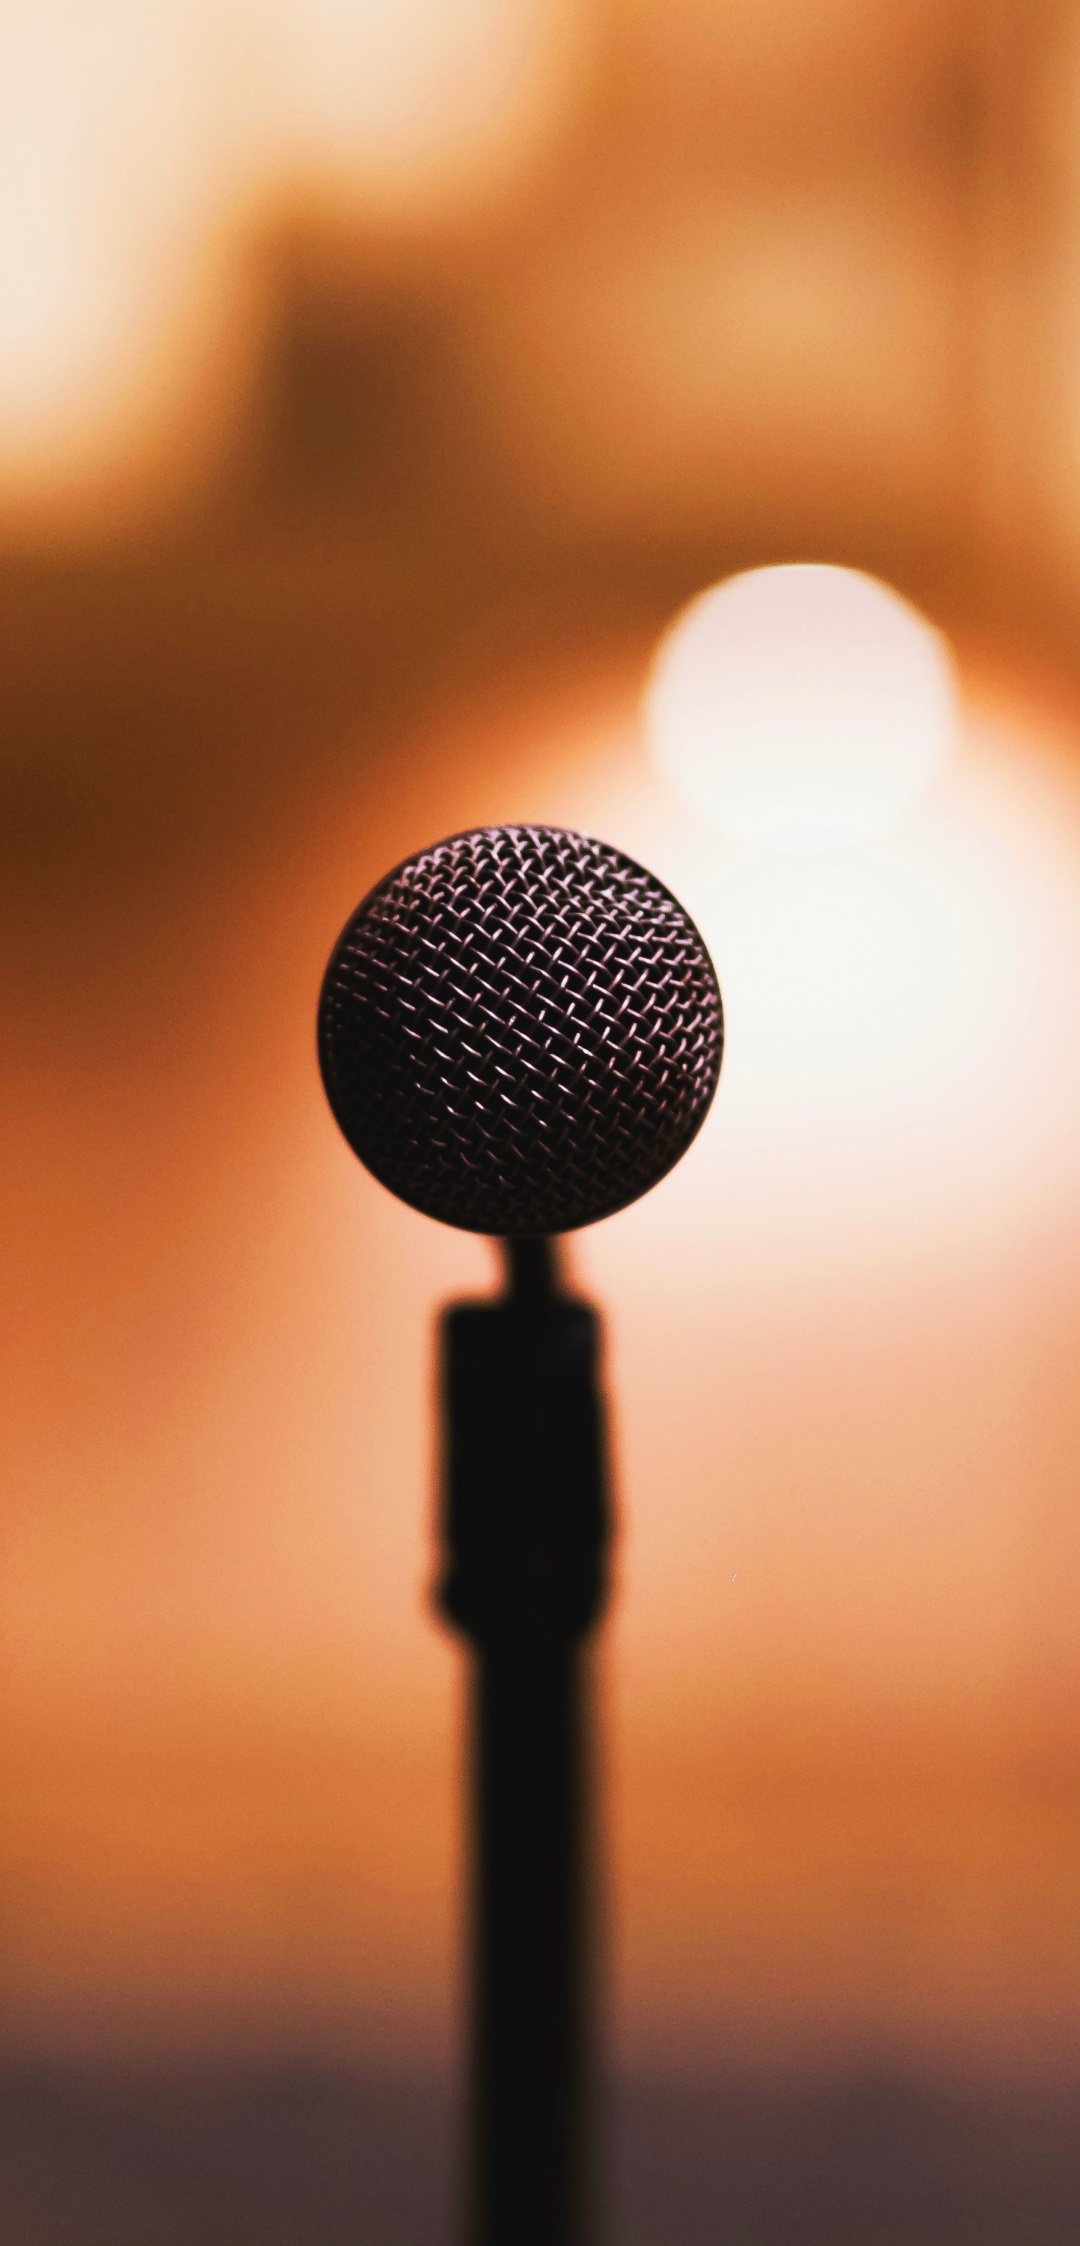 Musical vibes, Melodic notes, Harmonious melodies, Captivating microphone, 1080x2250 HD Handy